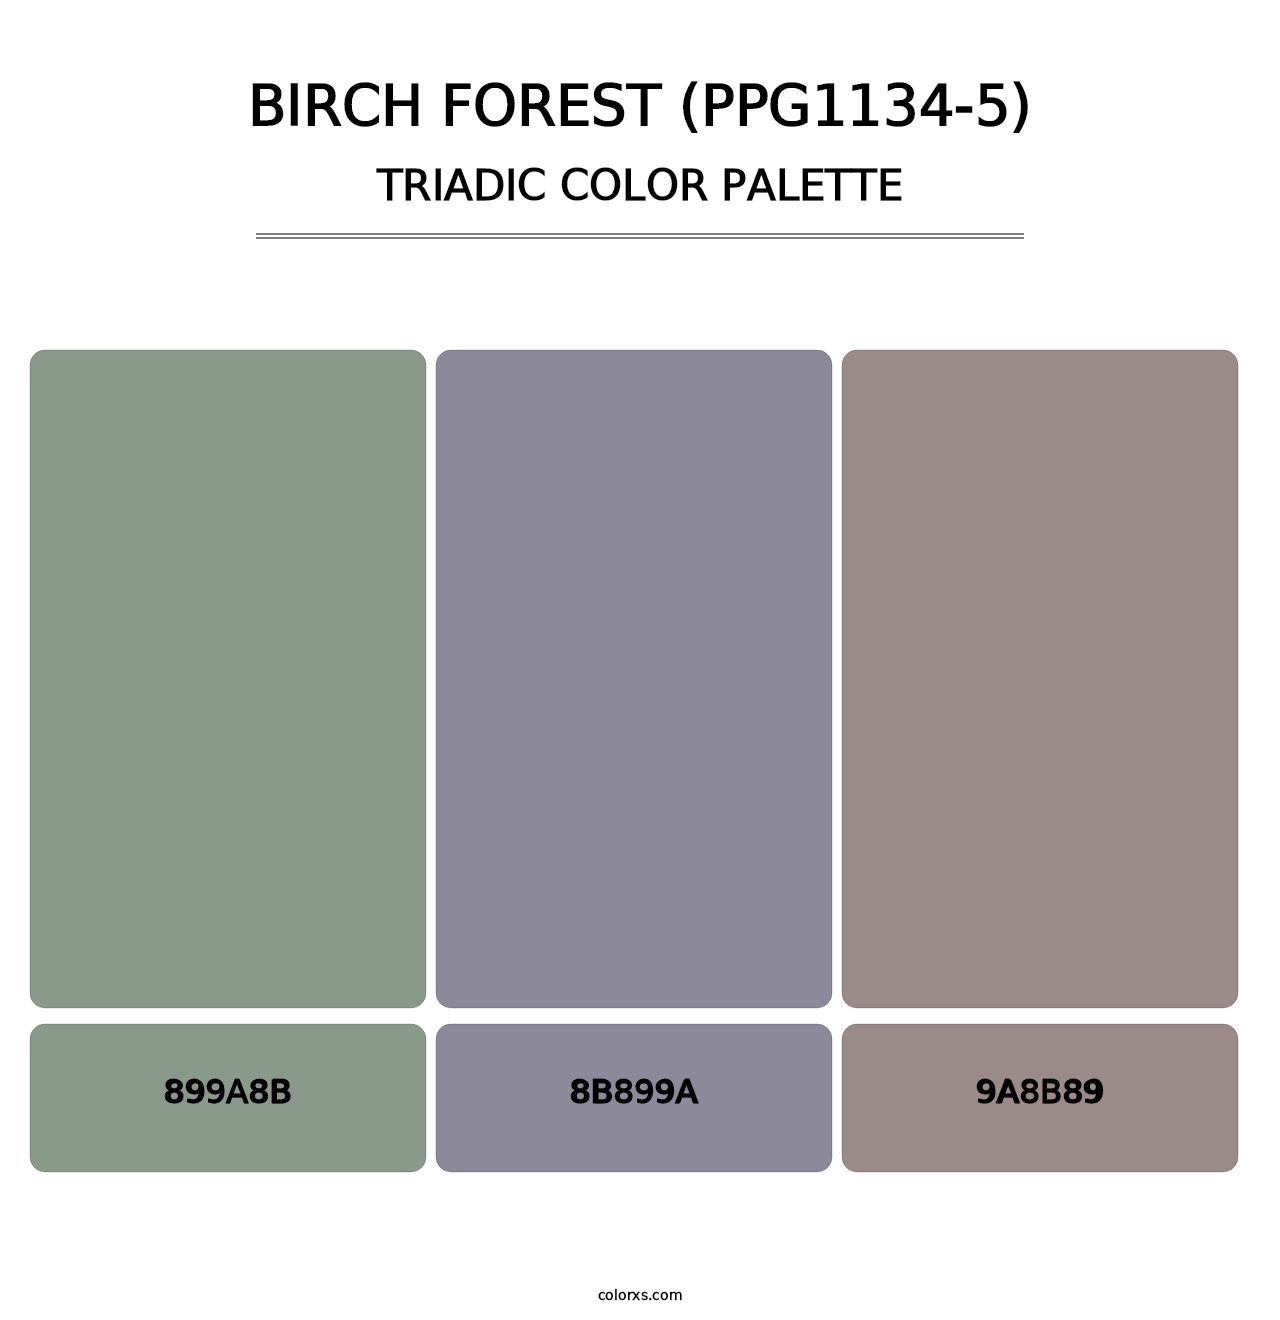 Birch Forest (PPG1134-5) - Triadic Color Palette